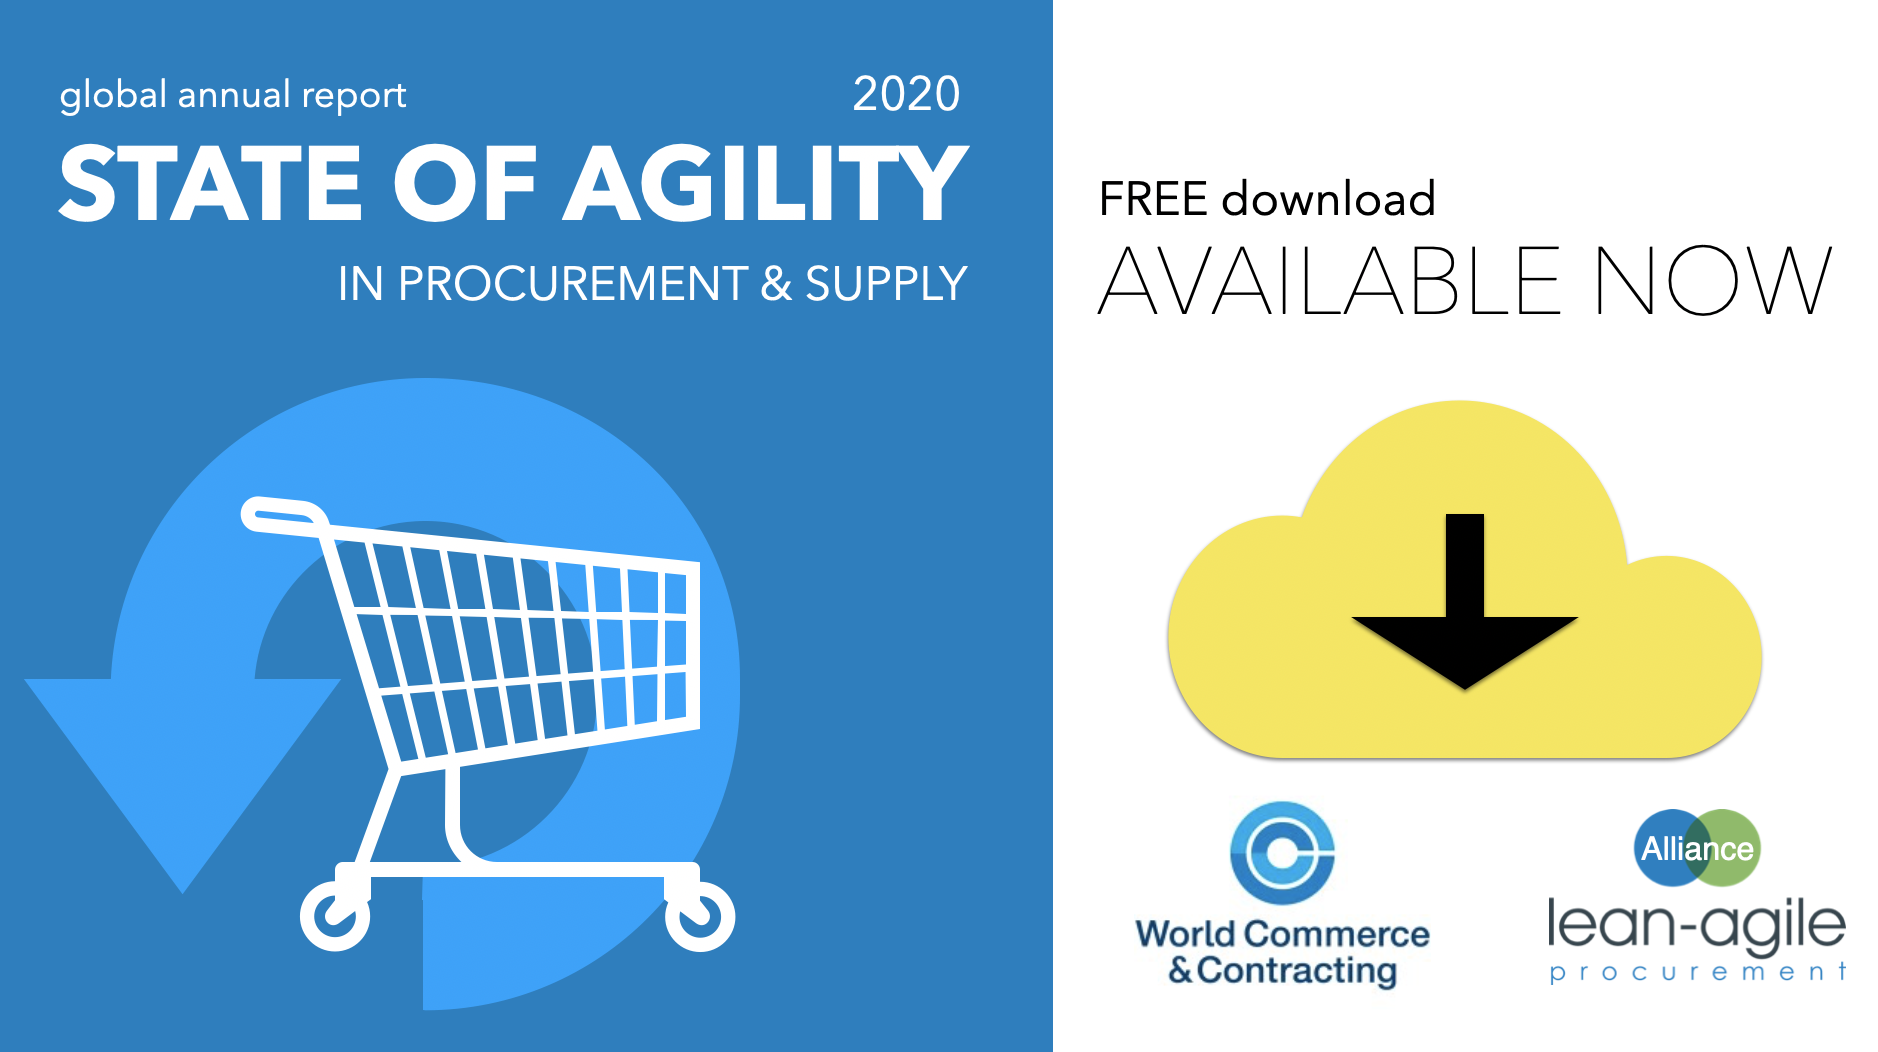 State of Agility in Procurement & Supply